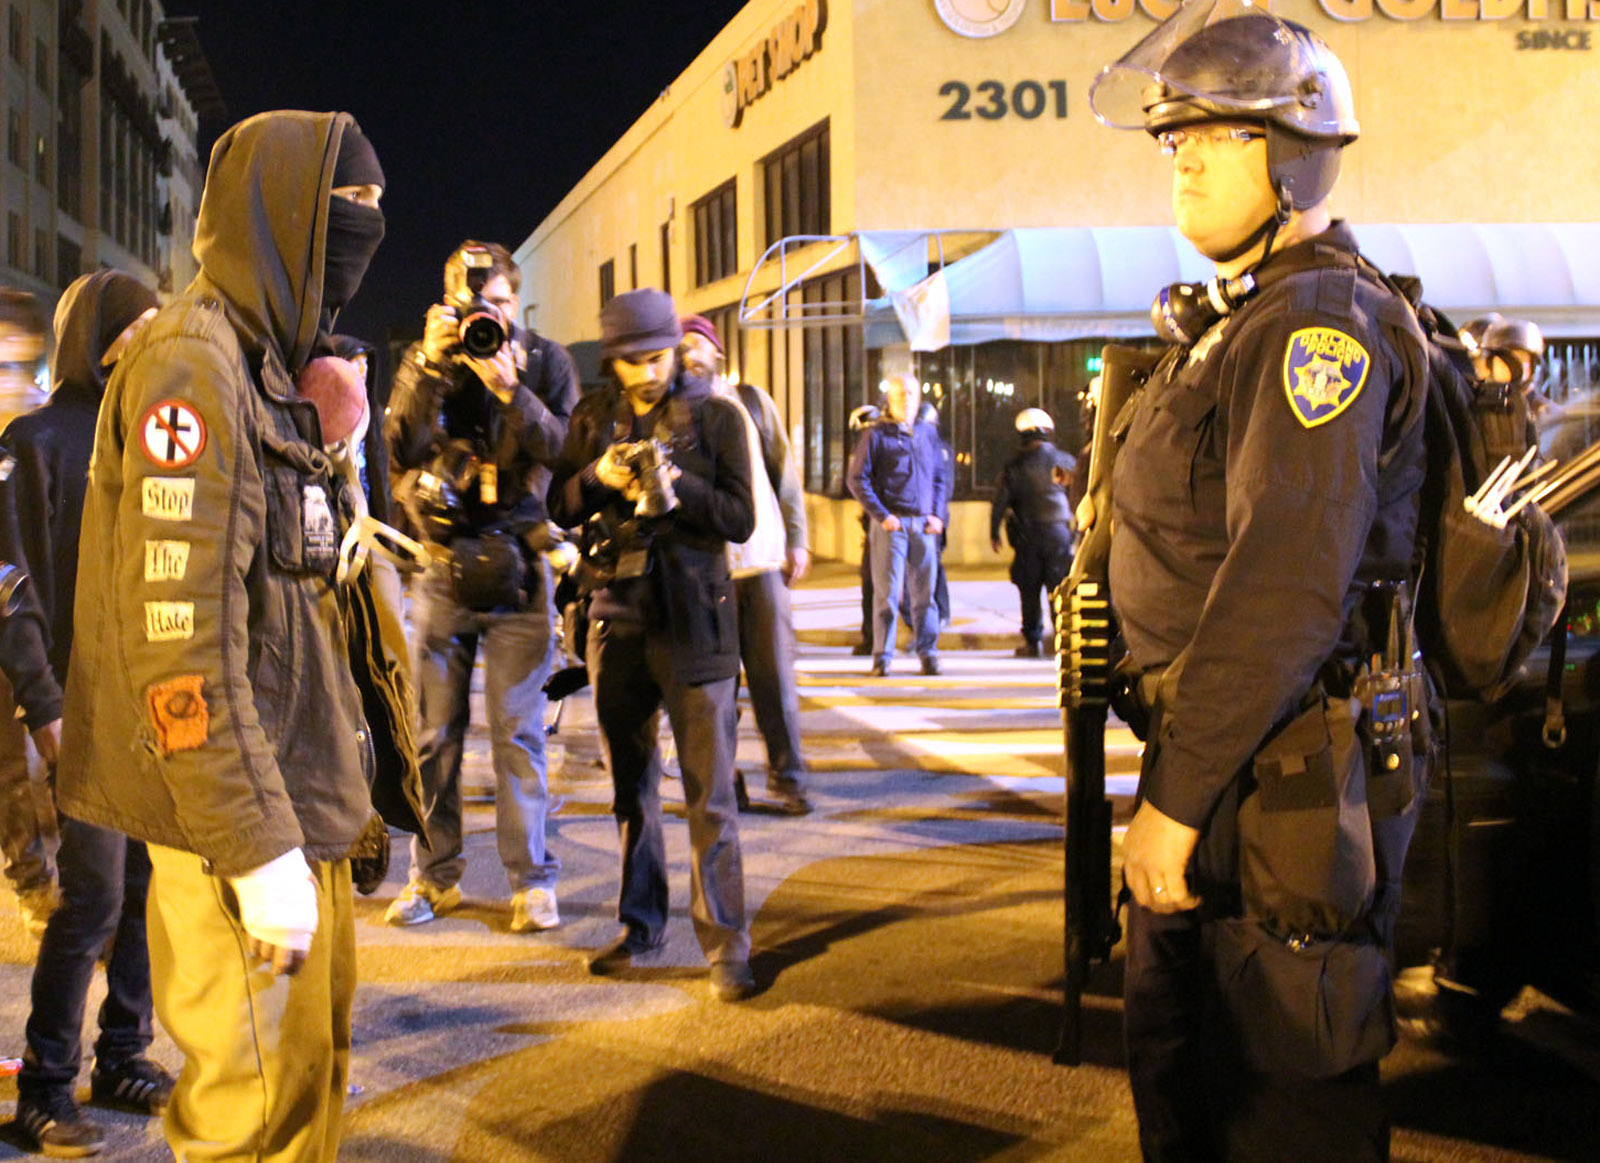 Journalists arrested at Saturday Occupy Oakland protest Oakland North